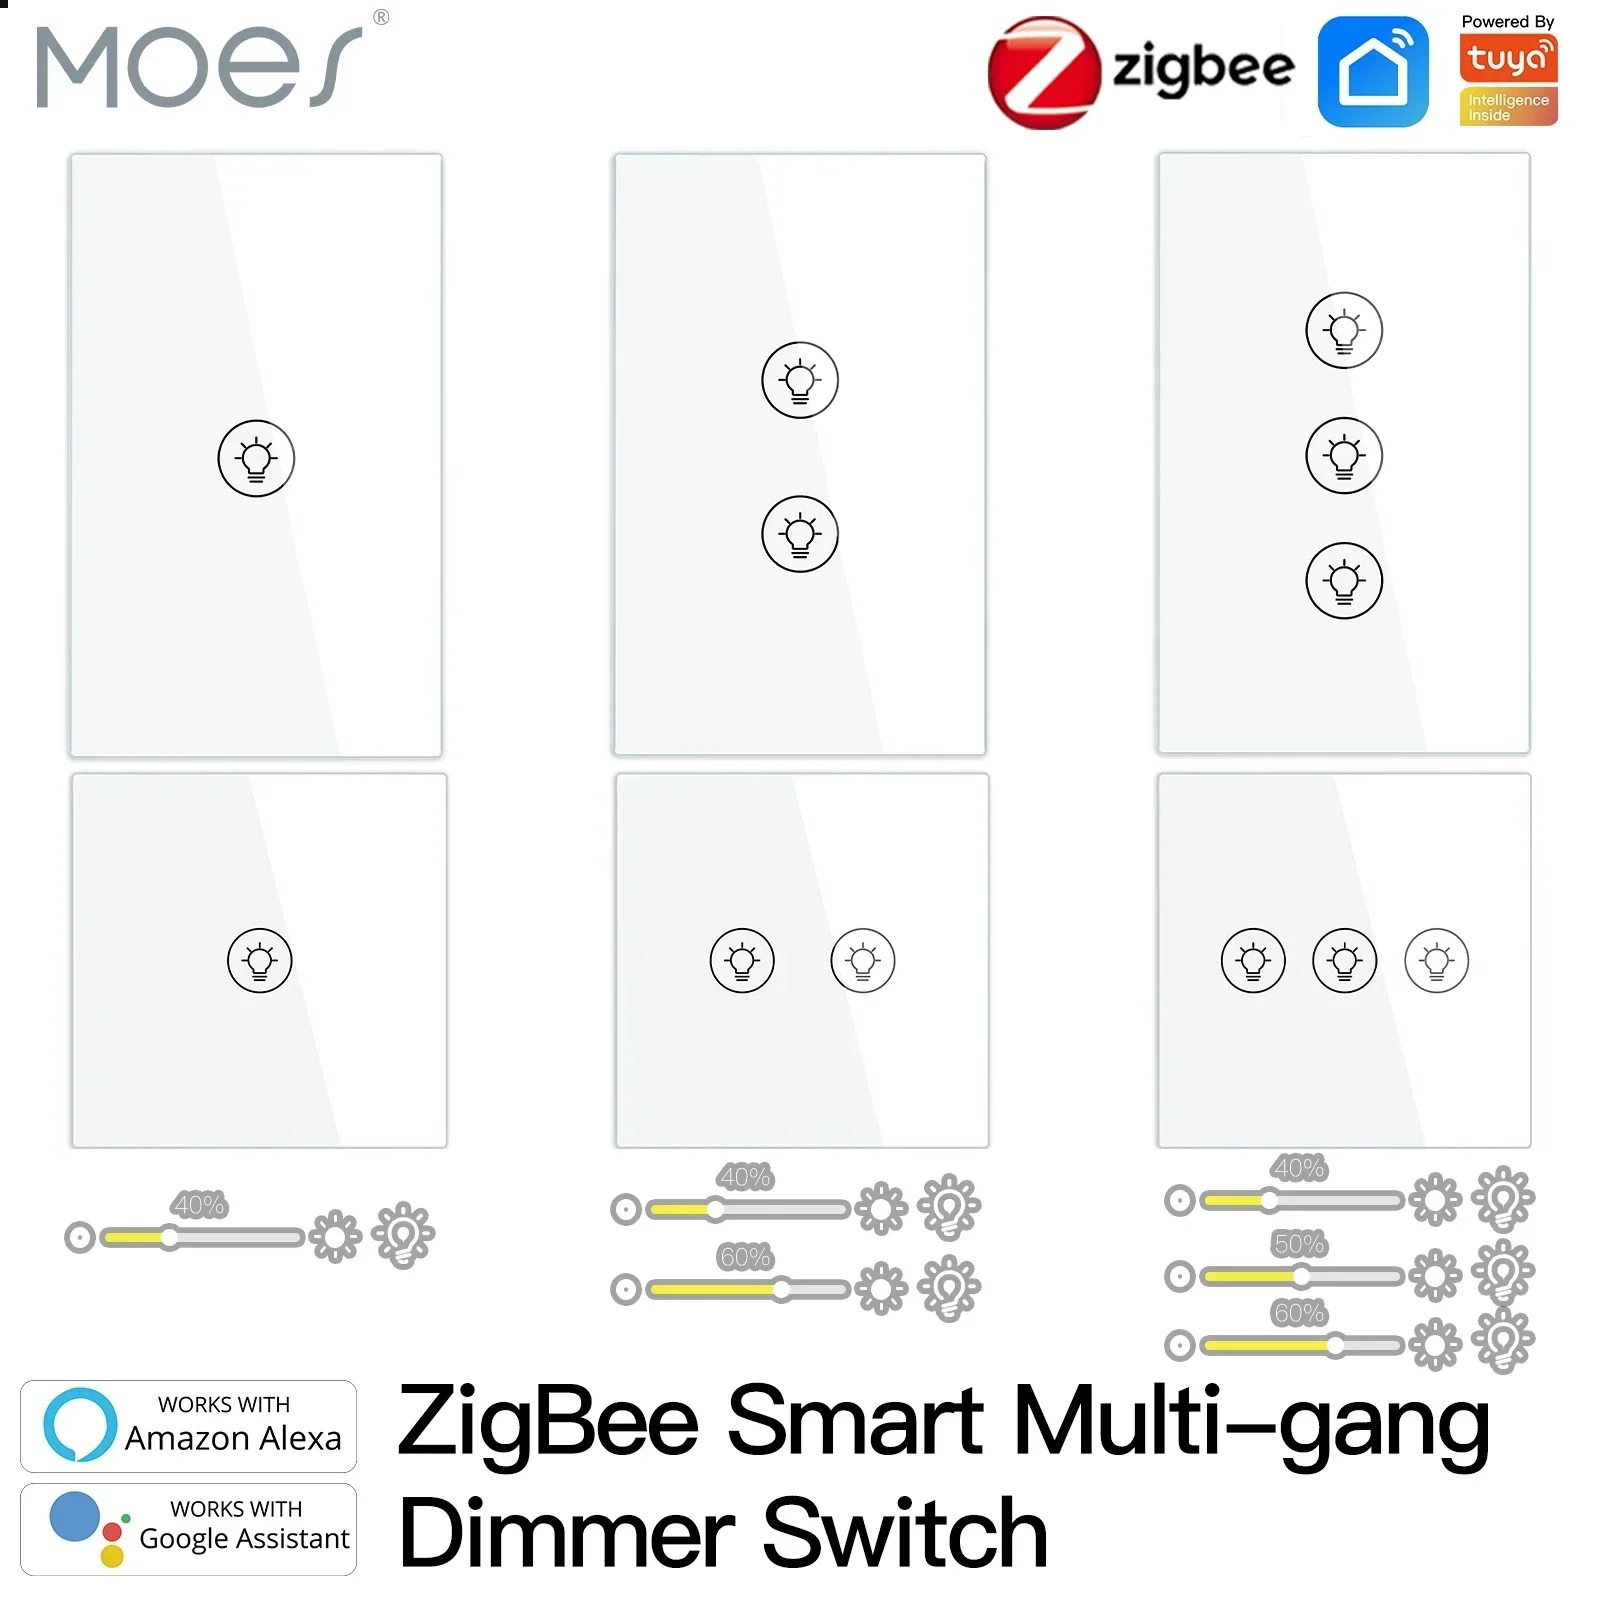 Smart ZigBee Multi-gang Light Dimmer Switch Independent Control Smart Tuya APP Control Works with Alexa Google Home 1/2/3 Gang 5pcs xiaomi aqara temperature humidity sensor works with apple homekit other aqara smart home devices white